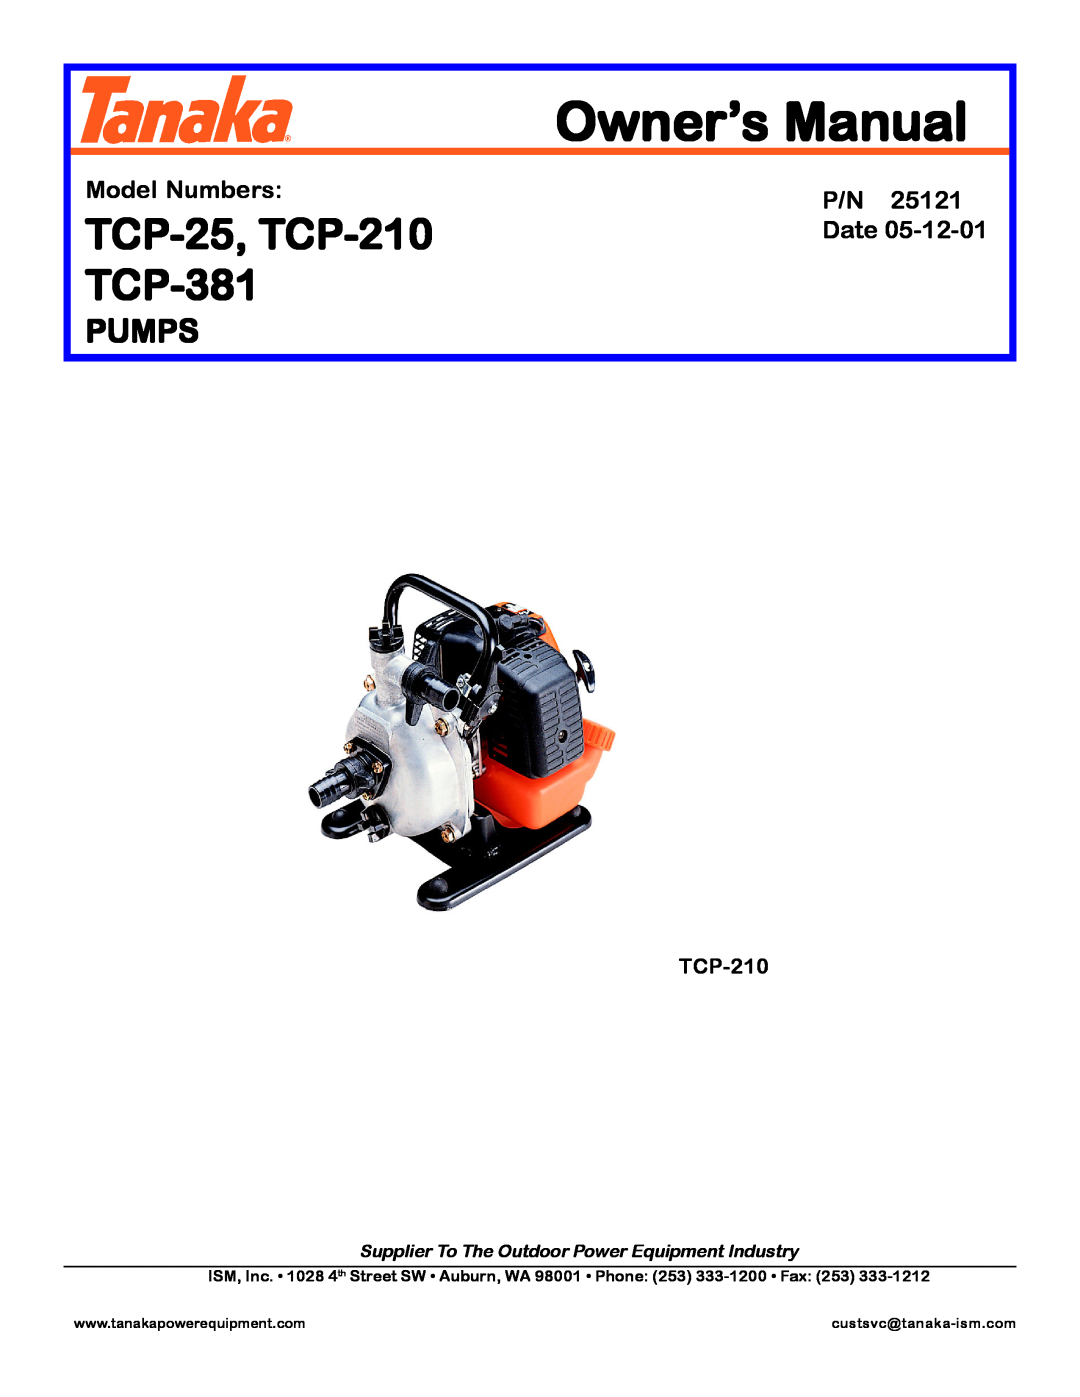 Tanaka TCP-381 manual Pumps, TCP-25, TCP-210, Model Numbers, Date, Supplier To The Outdoor Power Equipment Industry 